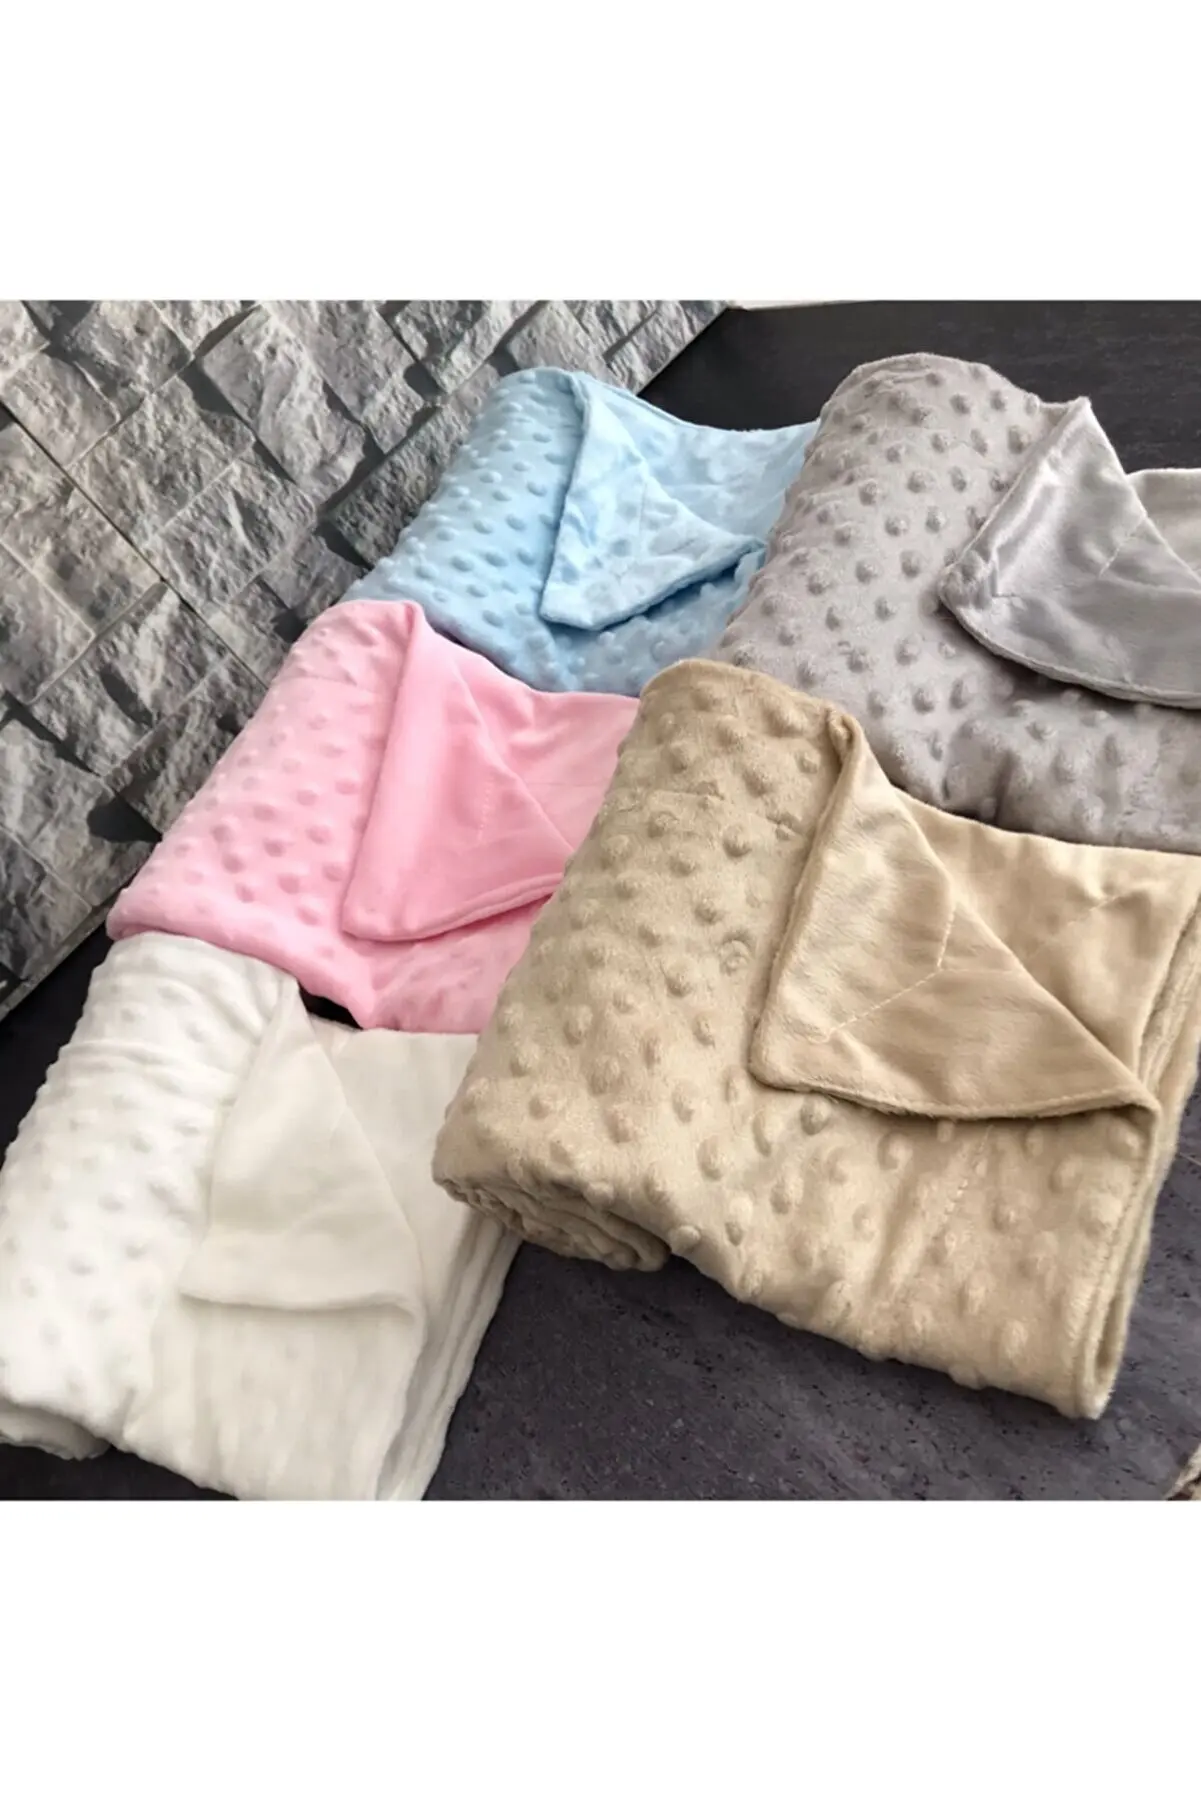 Baby Chickpea Blanket 100% Cotton in various colors 90x90 cm 0-12 months Turkish quality baby blanket